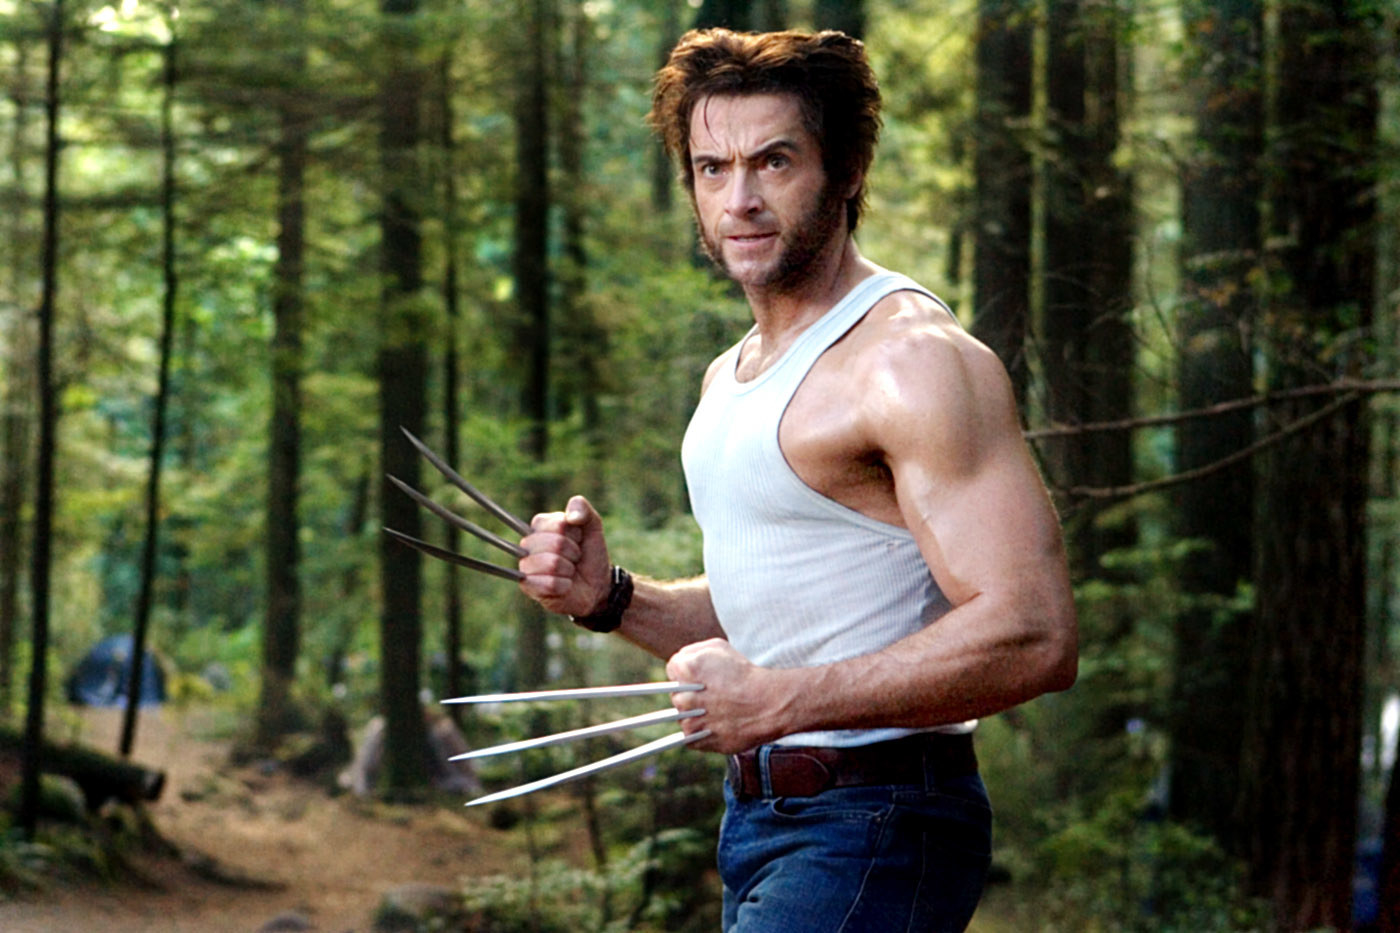 Wolverine has his claws out in a forest